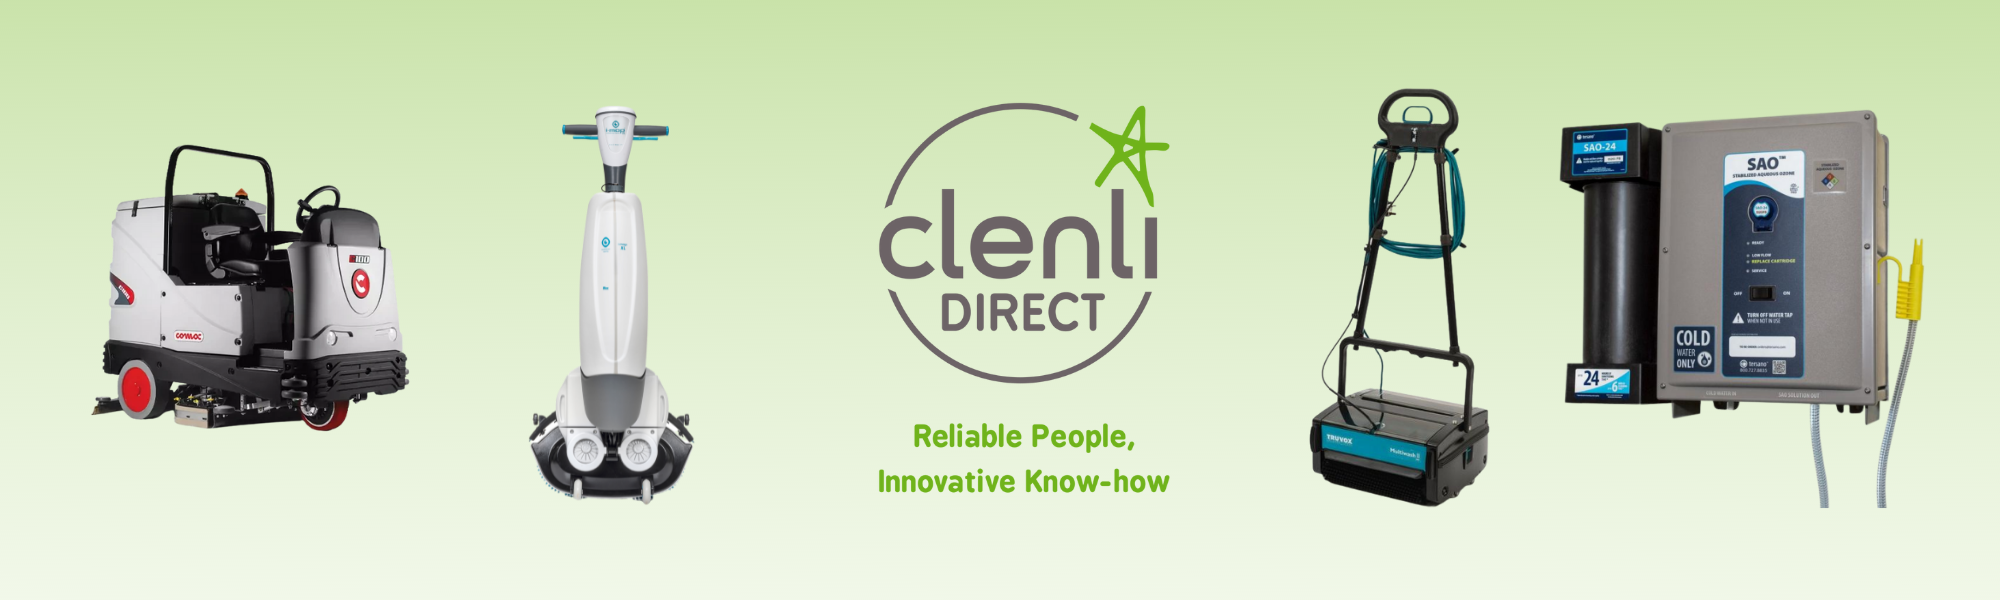 Industrial Cleaning Equipment at Clenli Direct